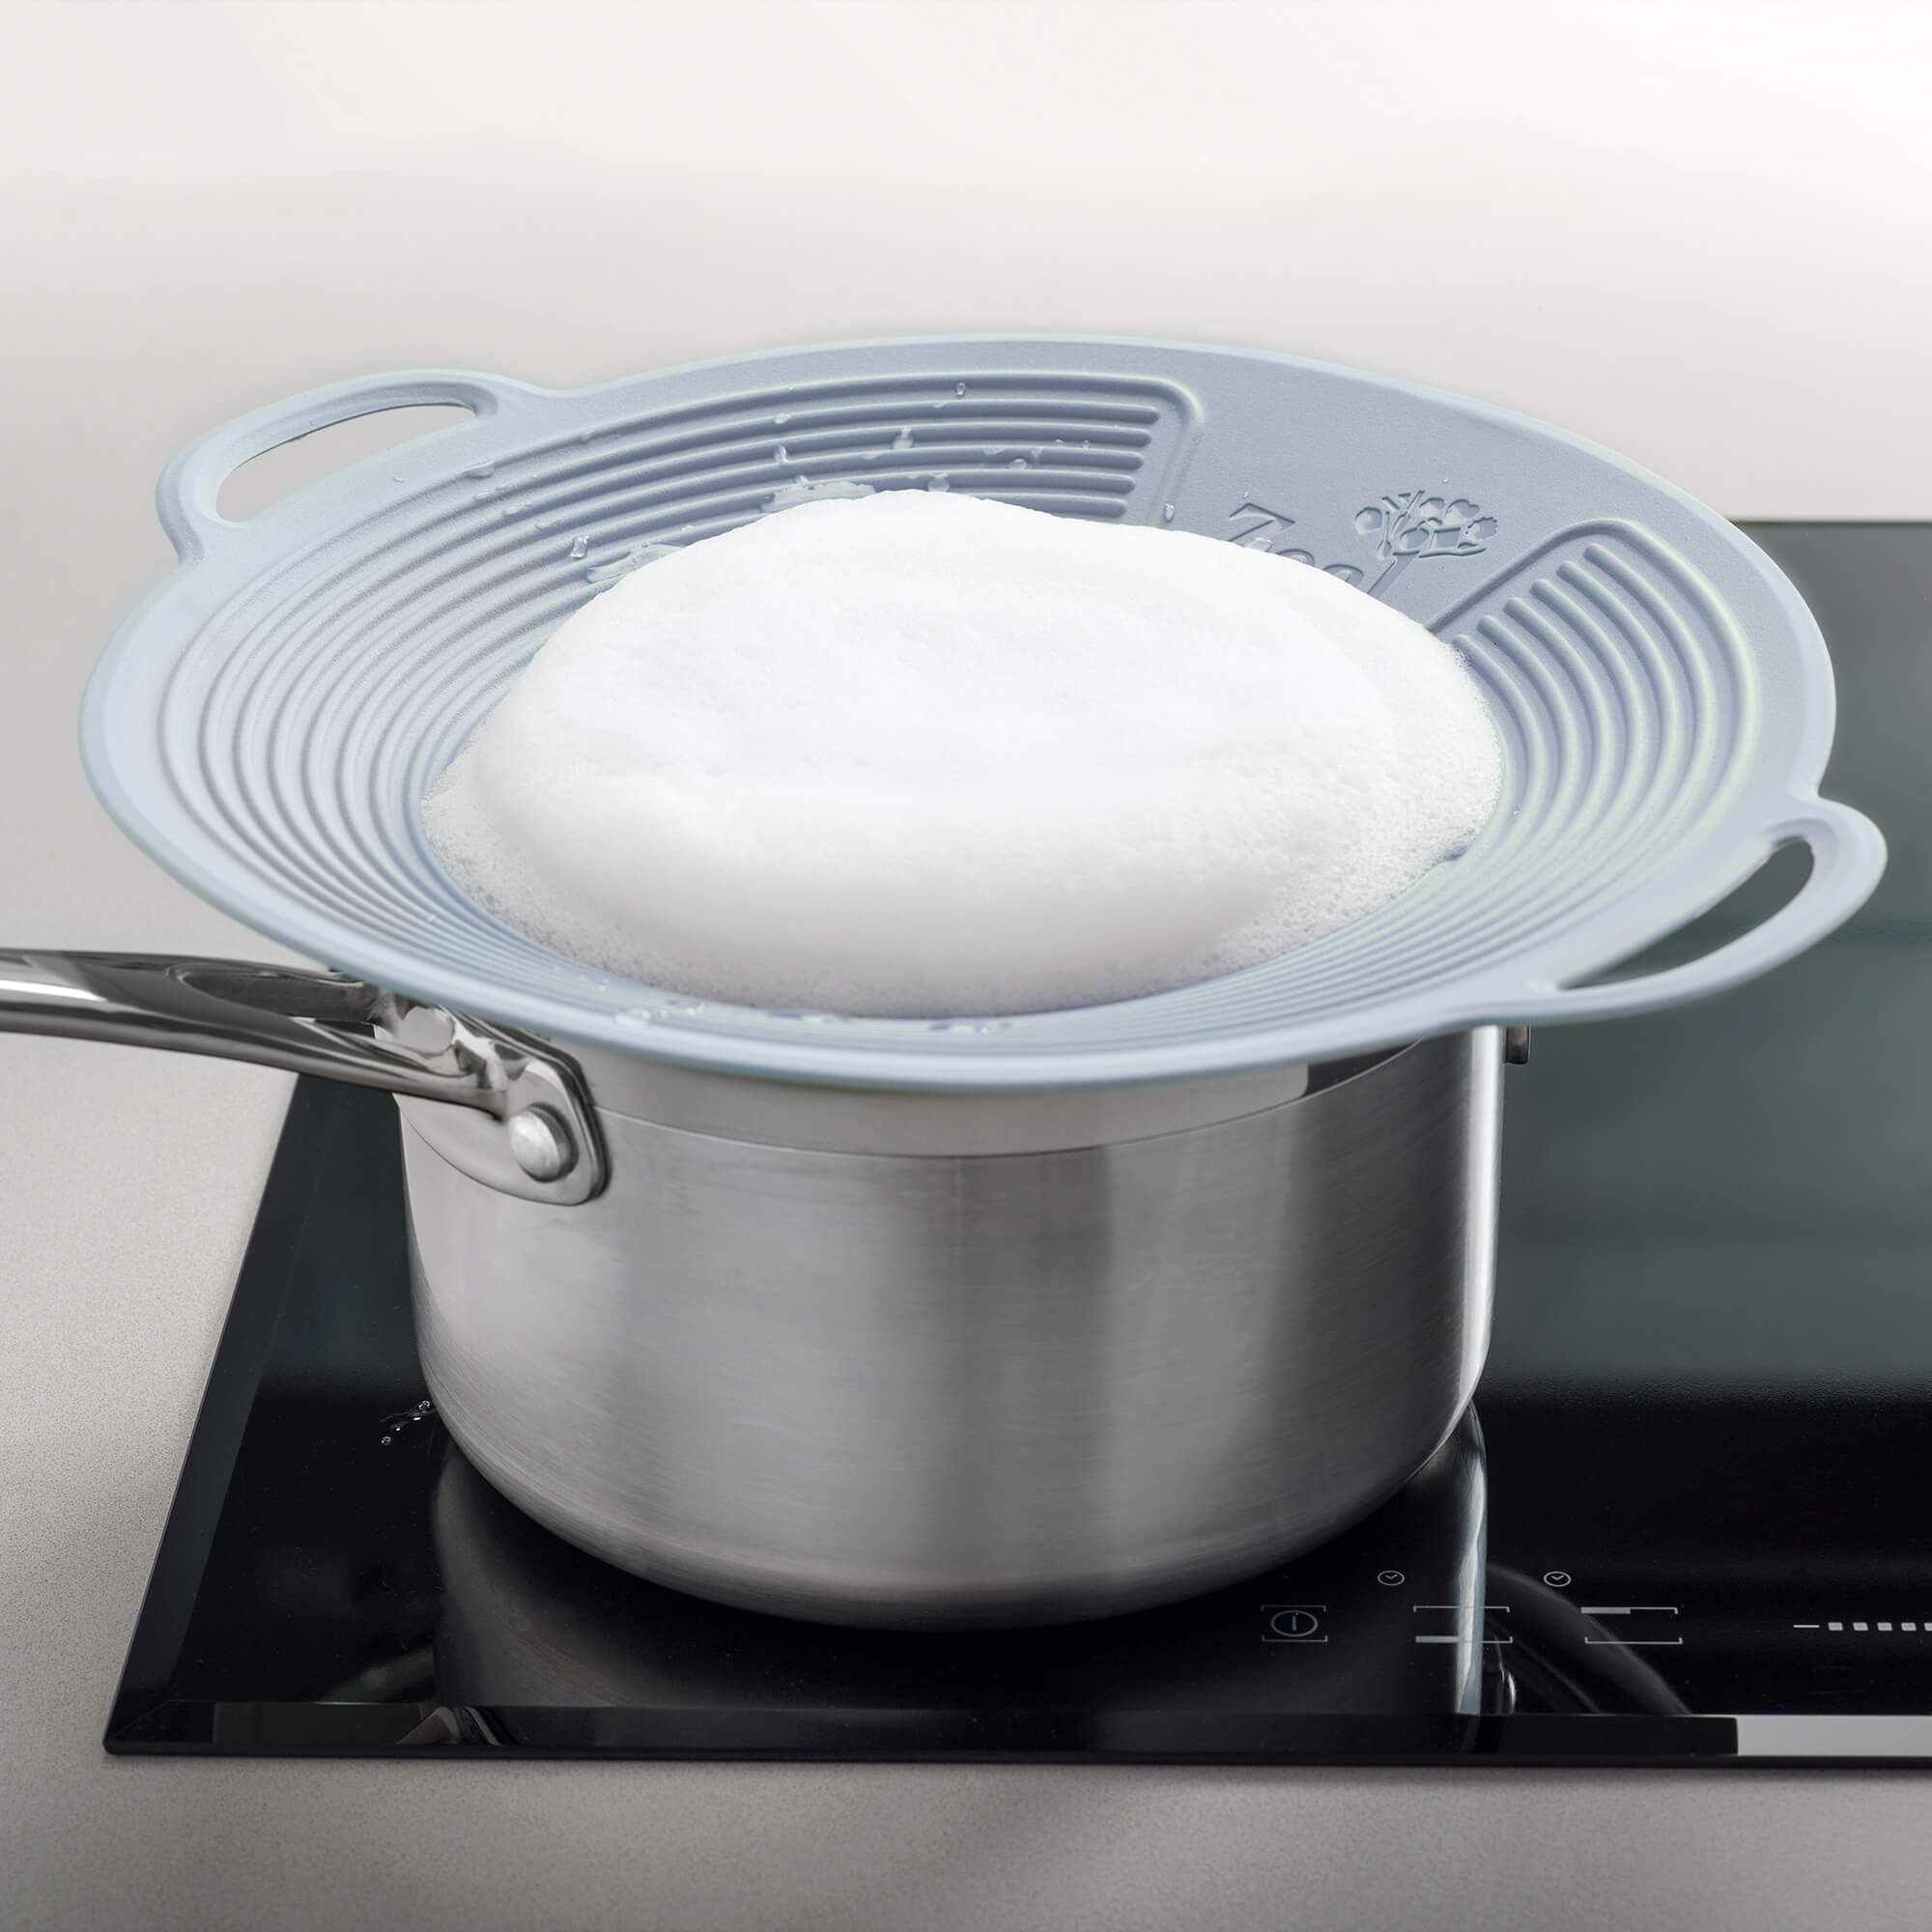 Silicone Boil Over Lid by Zeal used on a saucepan